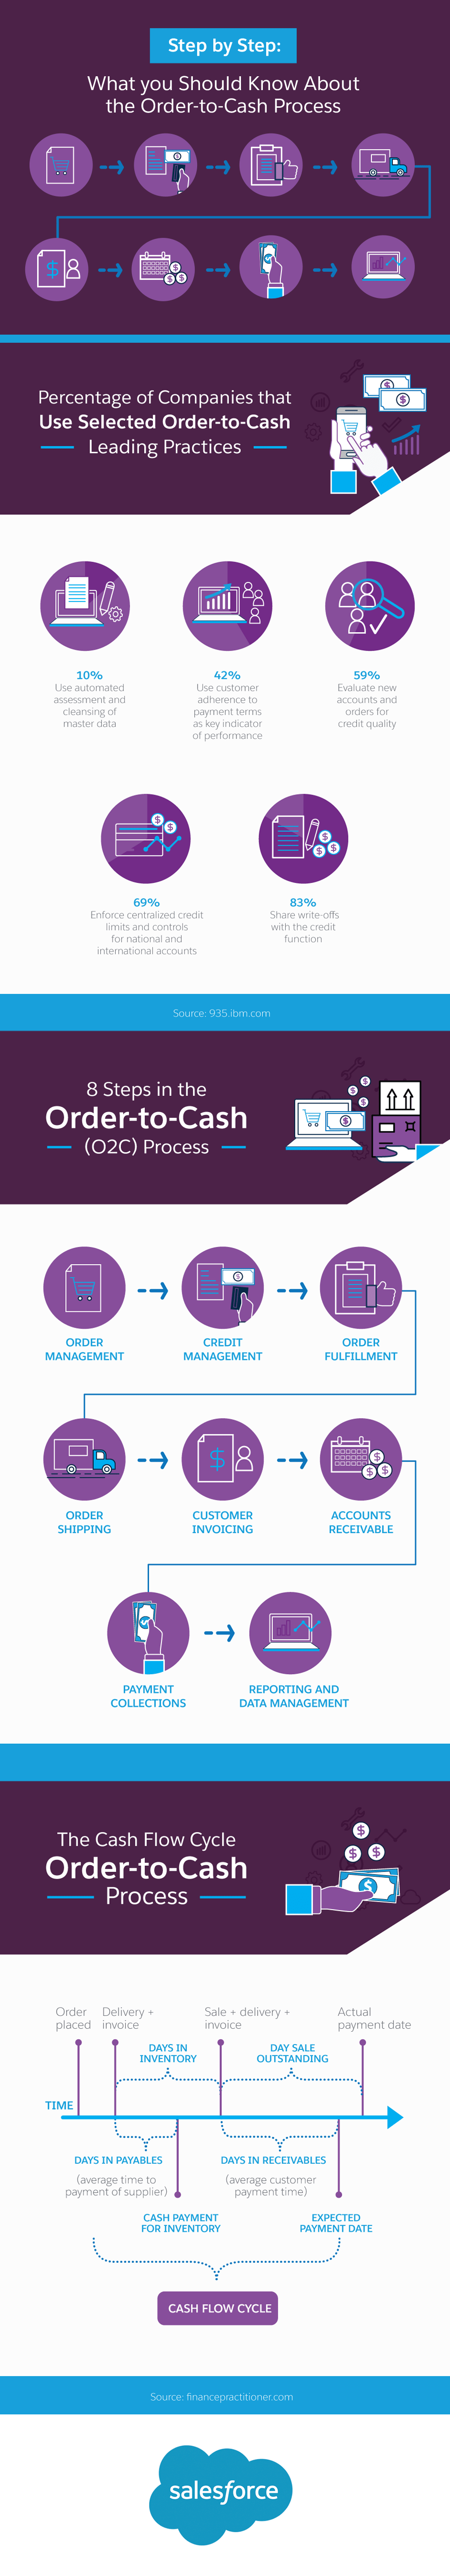 What you Should Know About the Order-to-Cash Process